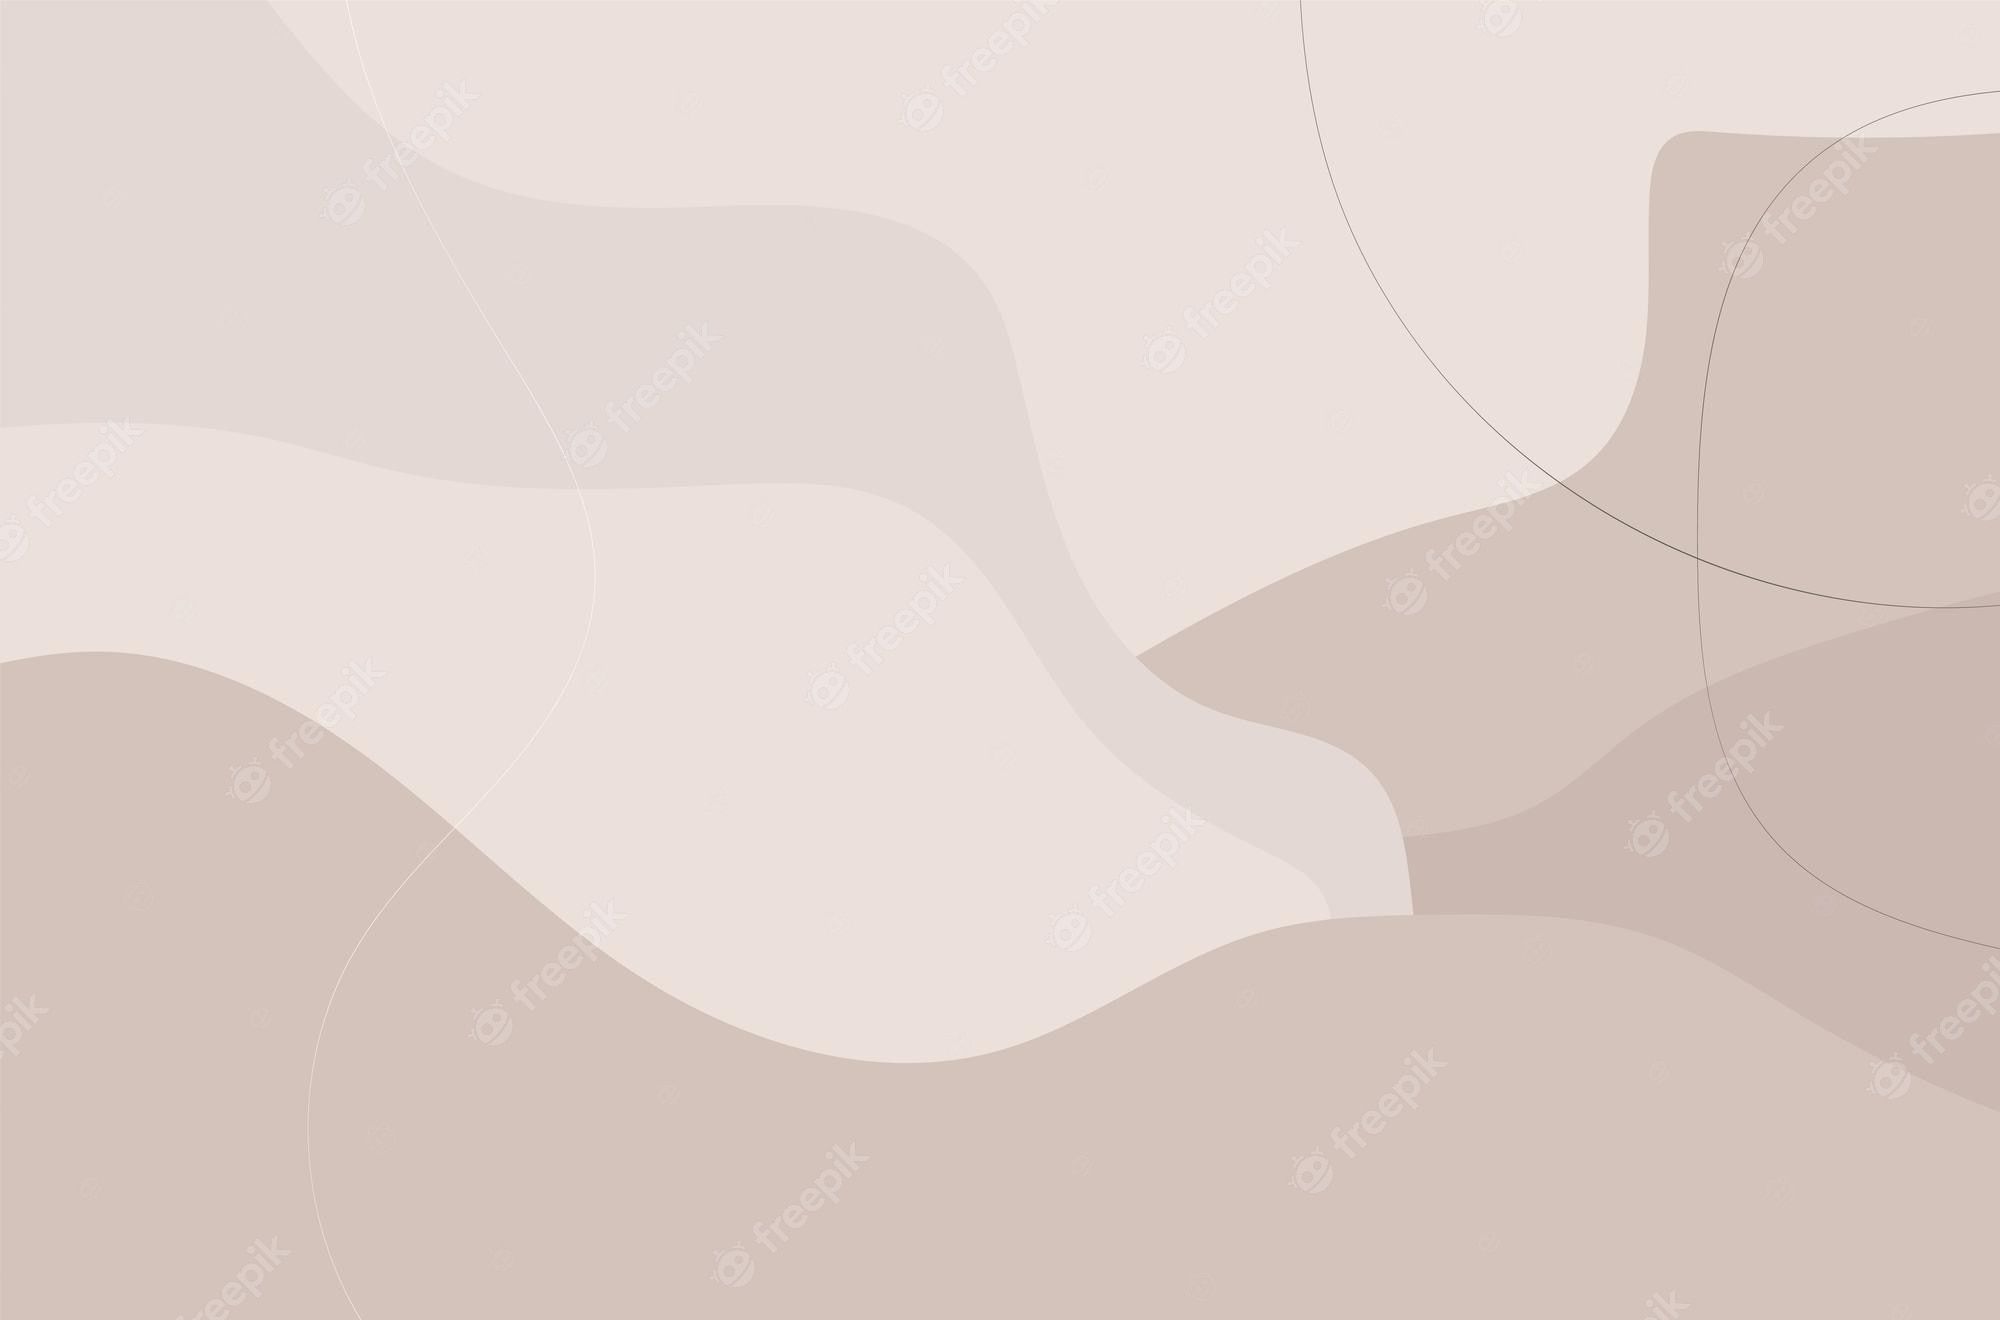 A light brown background with abstract shapes - Neutral